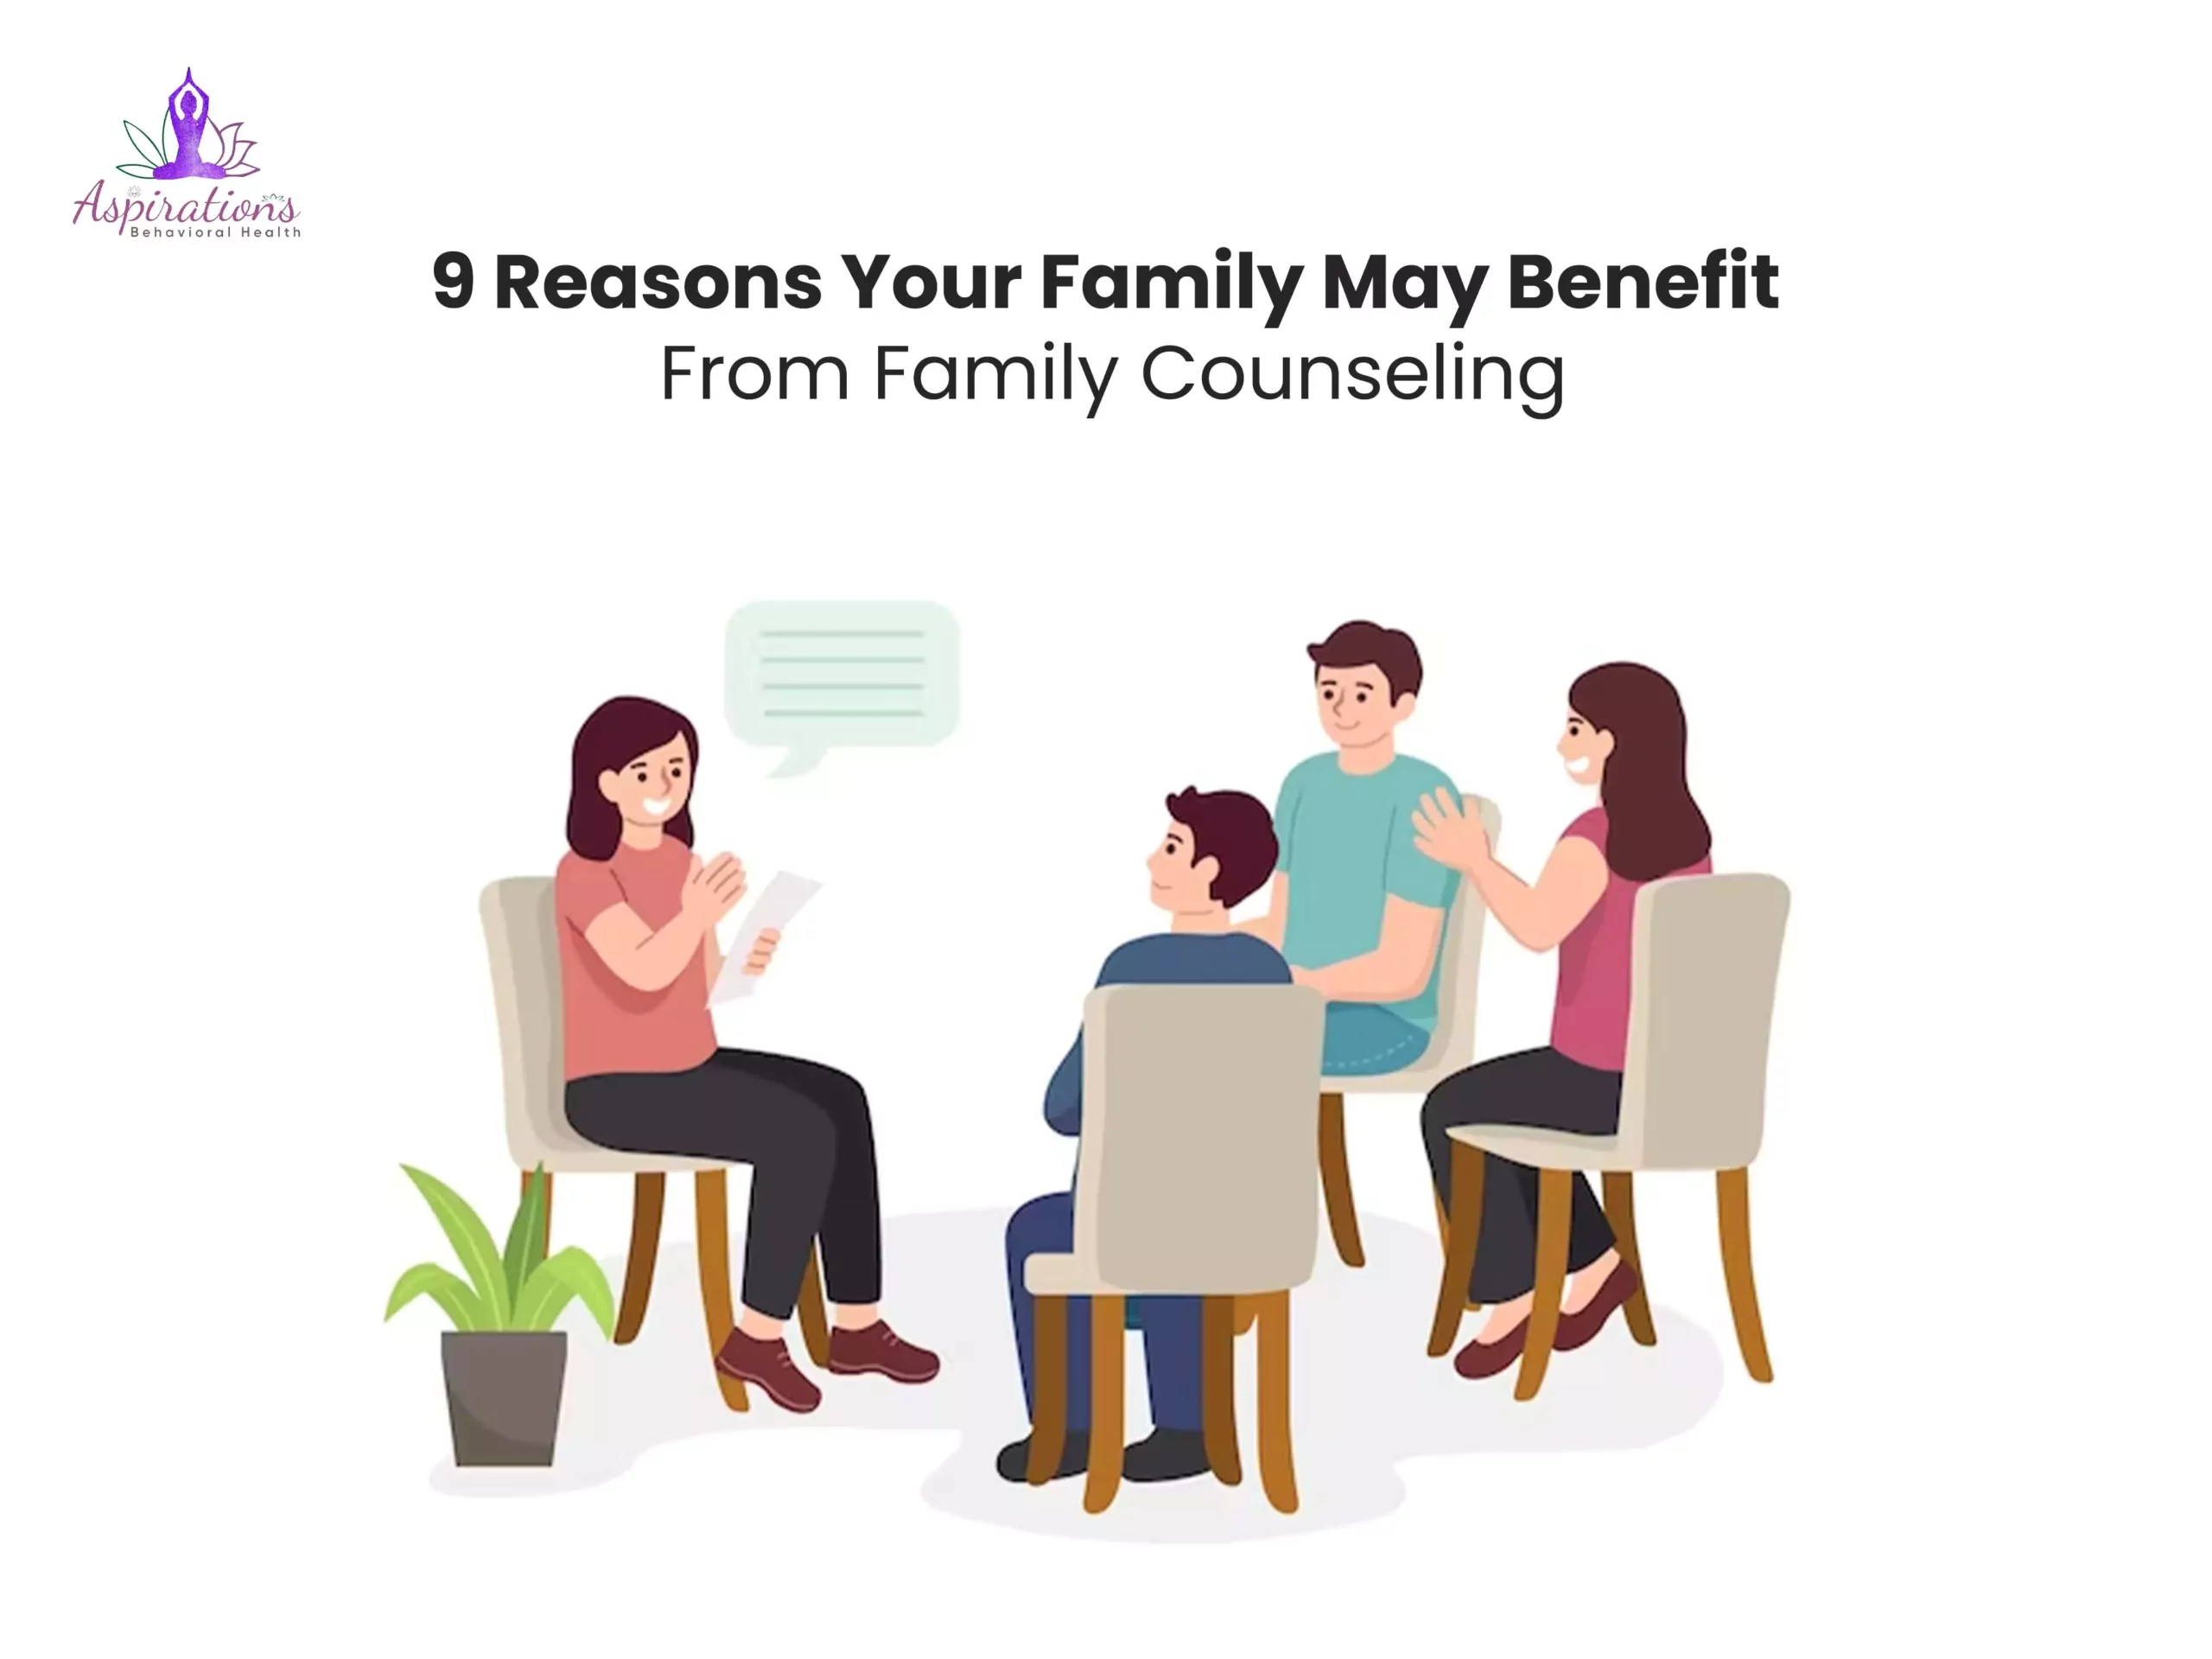 9 Reasons Your Family May Benefit From Family Counseling